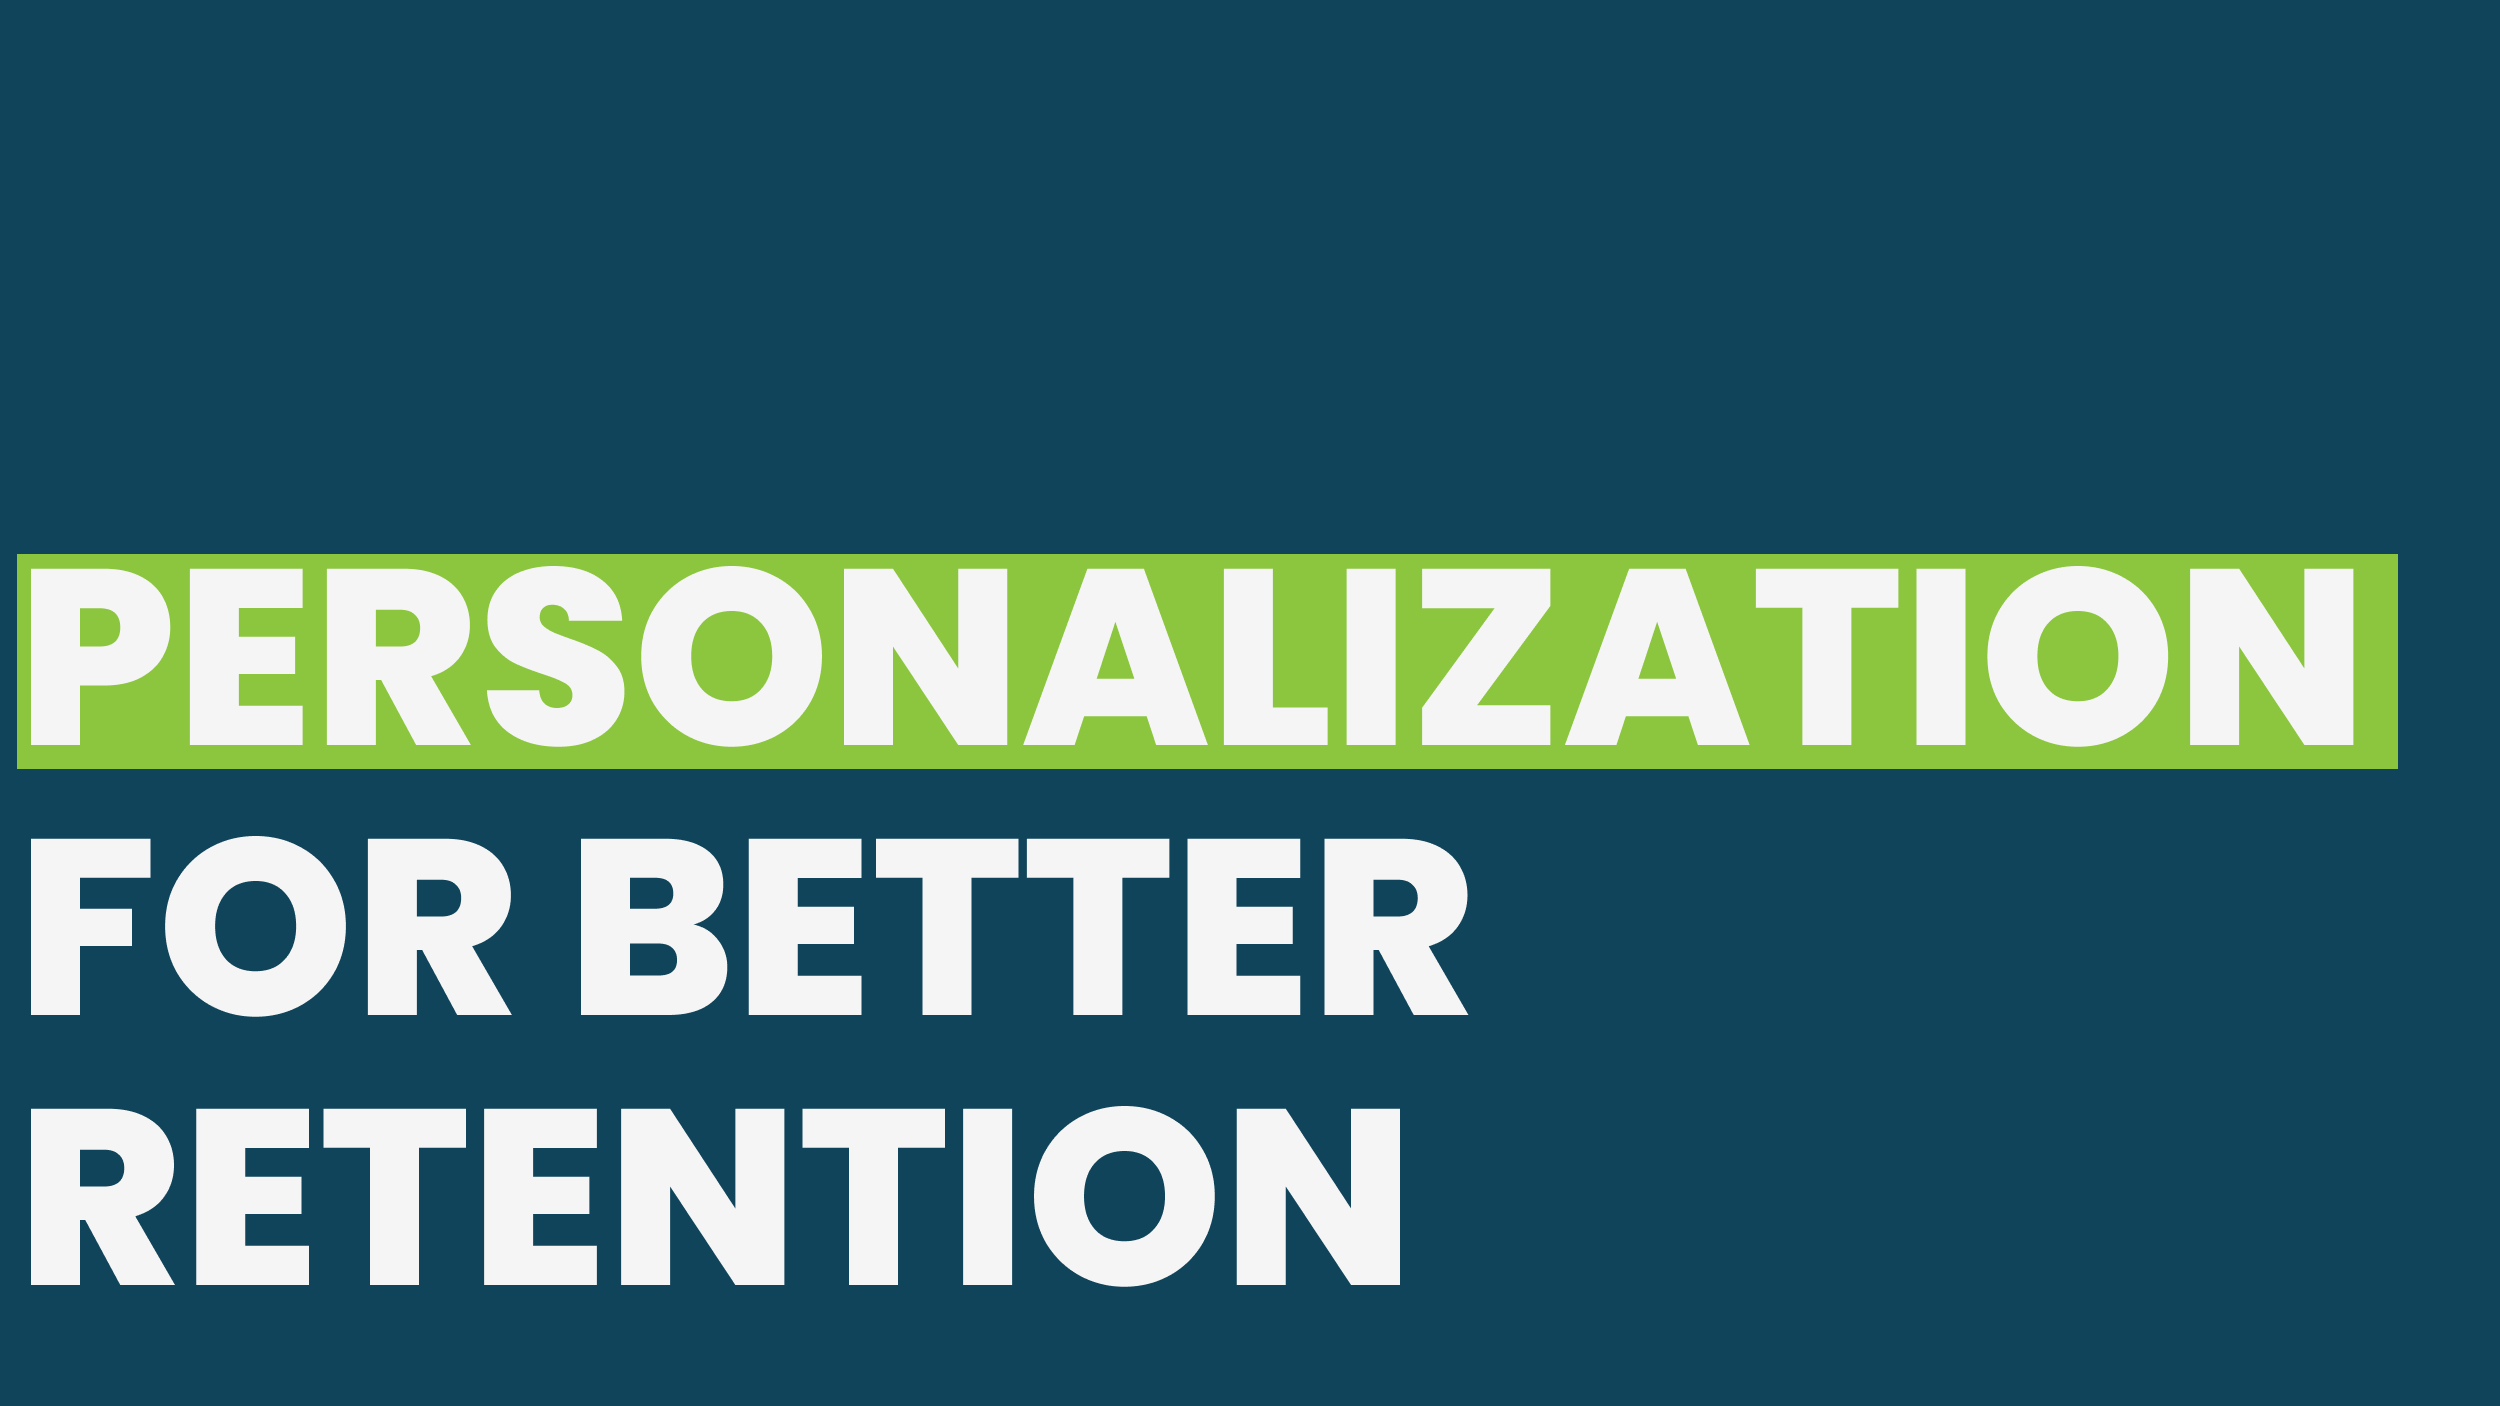 Hyper-personalization for a Better Customer Experience